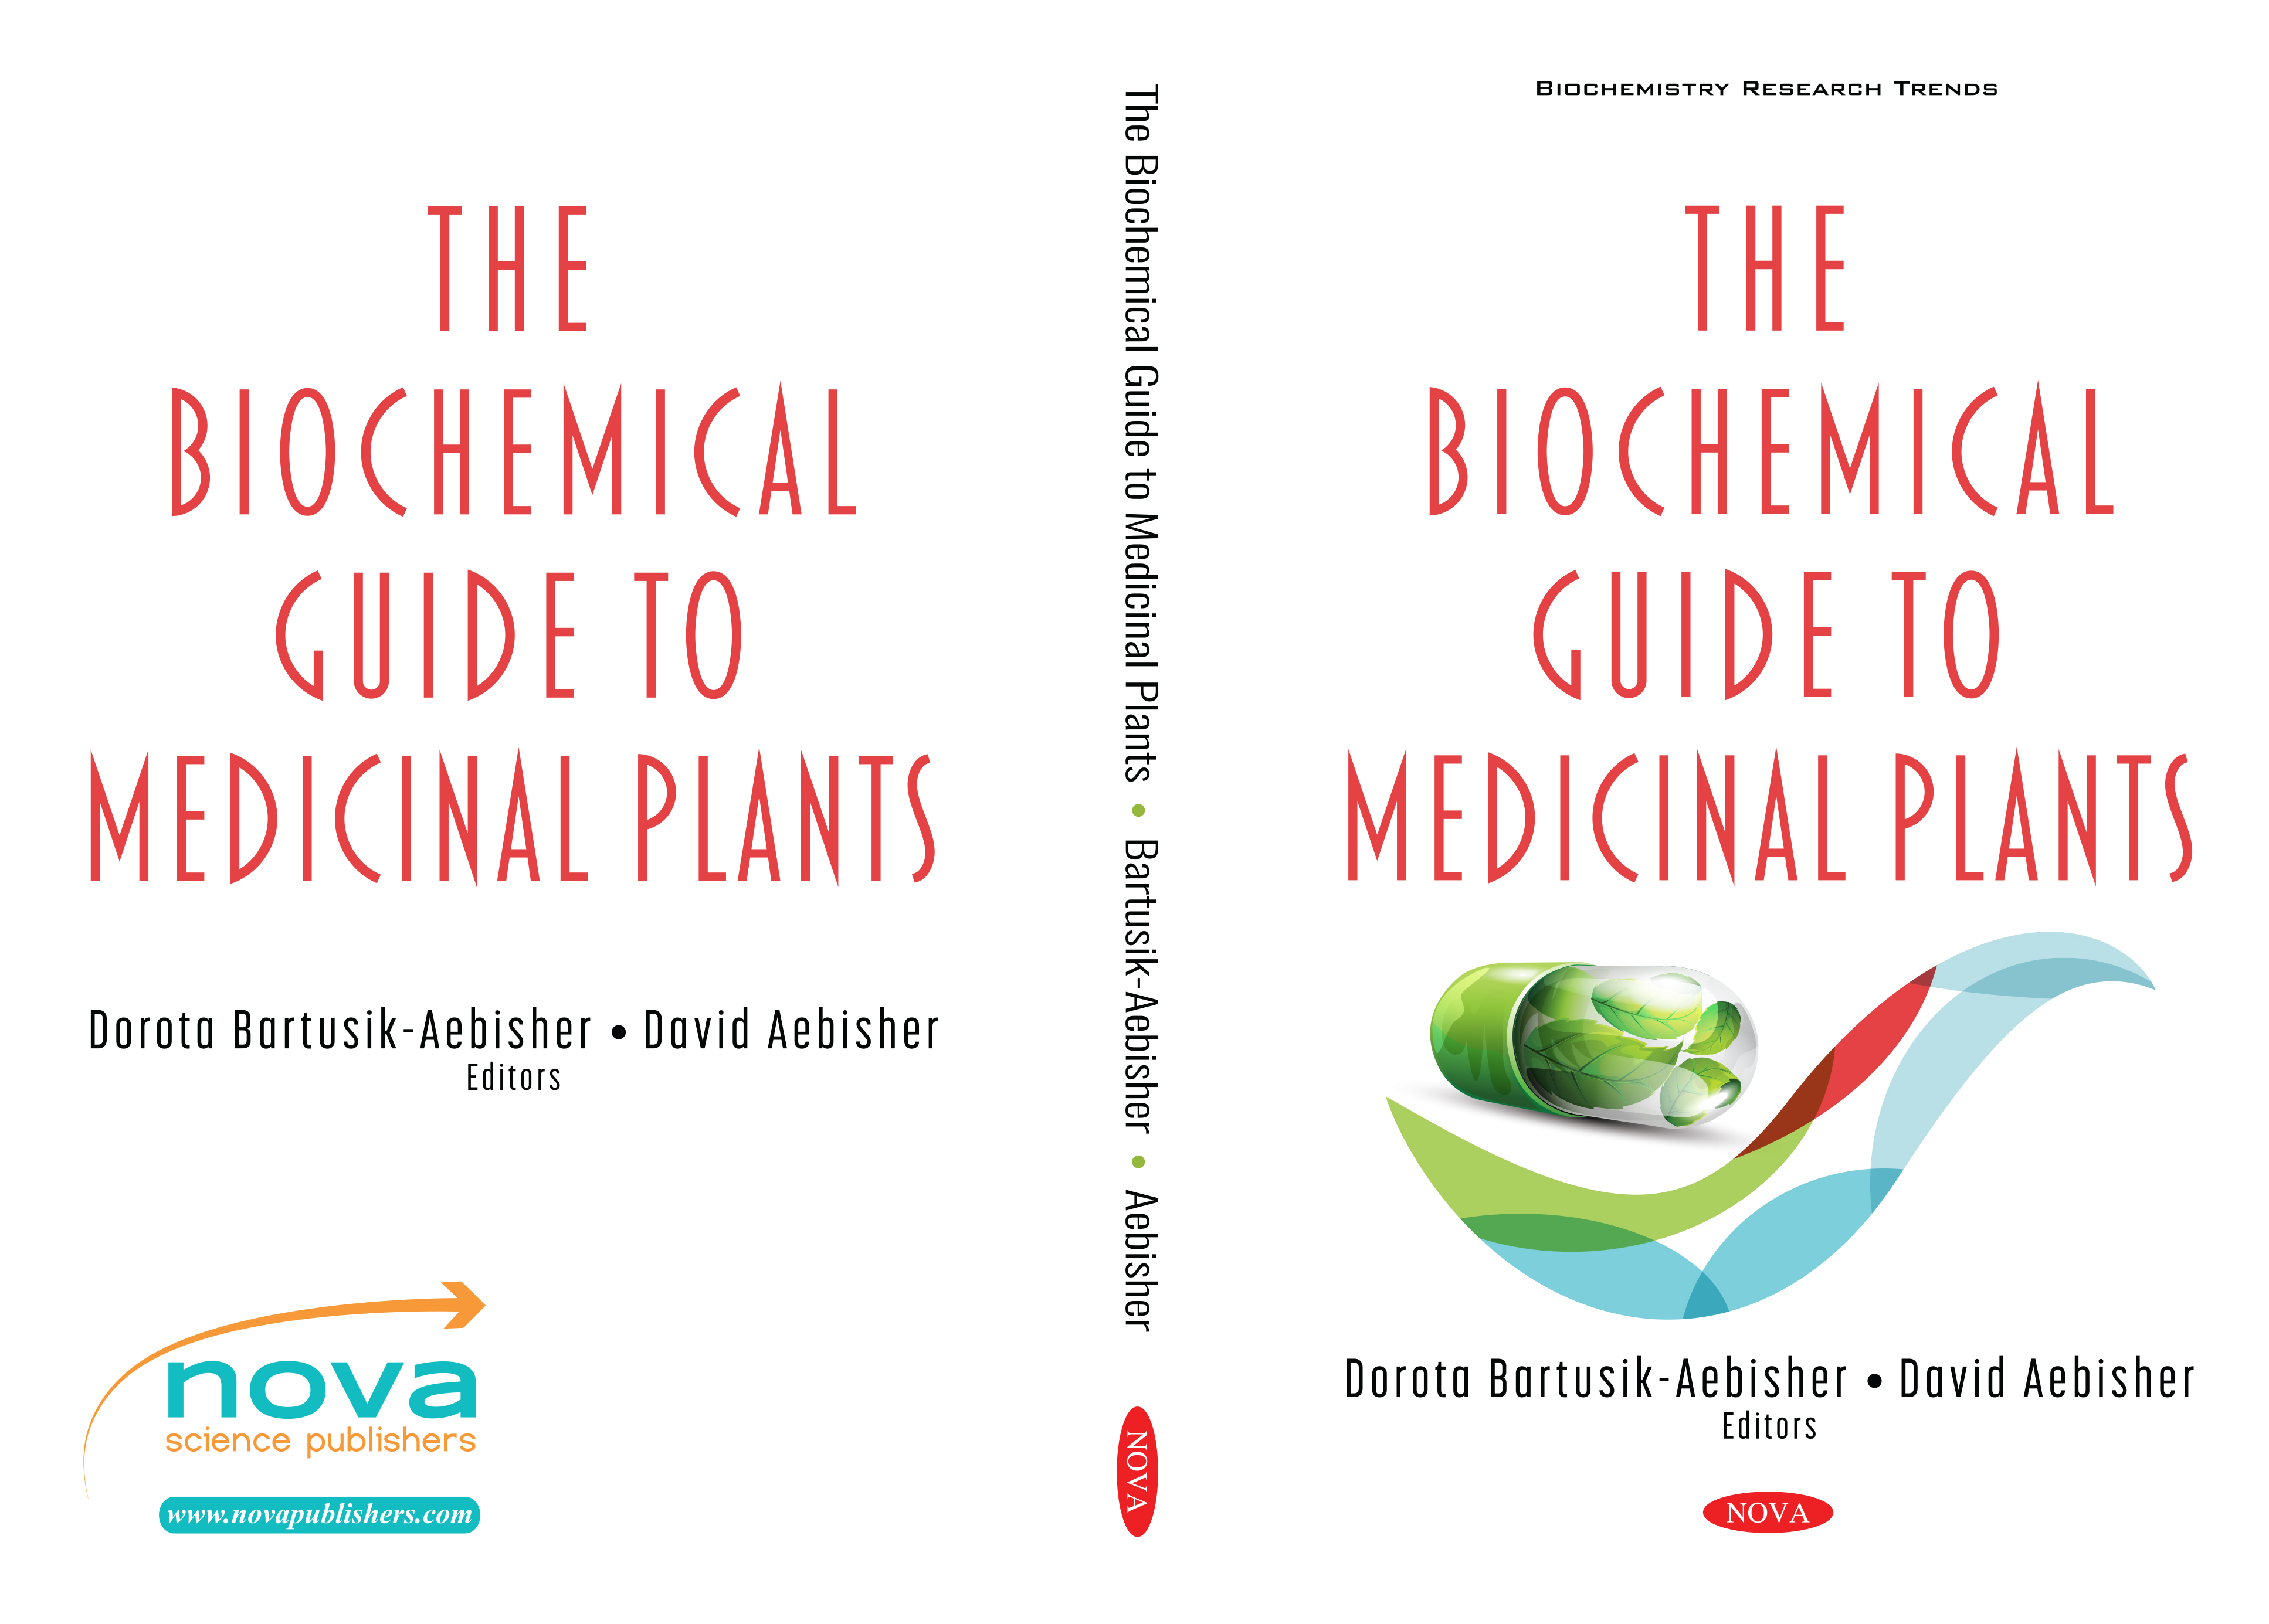 The Biochemical Guide to Medicinal Plants 978-1-53618-902-5 (2).jpg [1.65 MB]